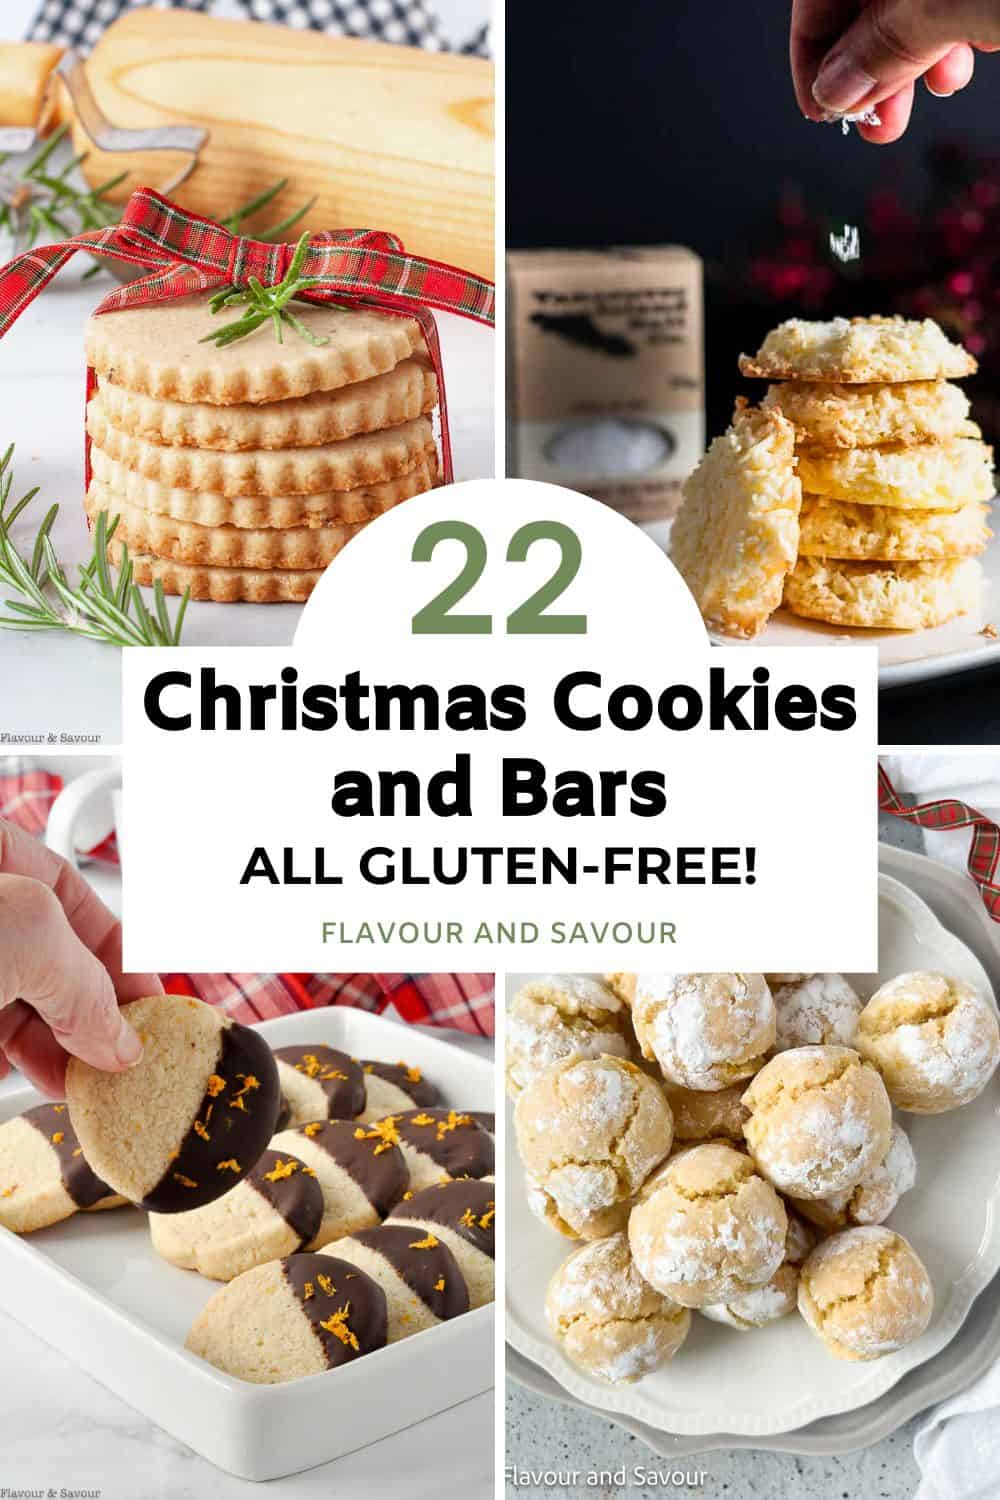 A collage of images with text overlay for 22 Christmas cookies and bars, all gluten-free.